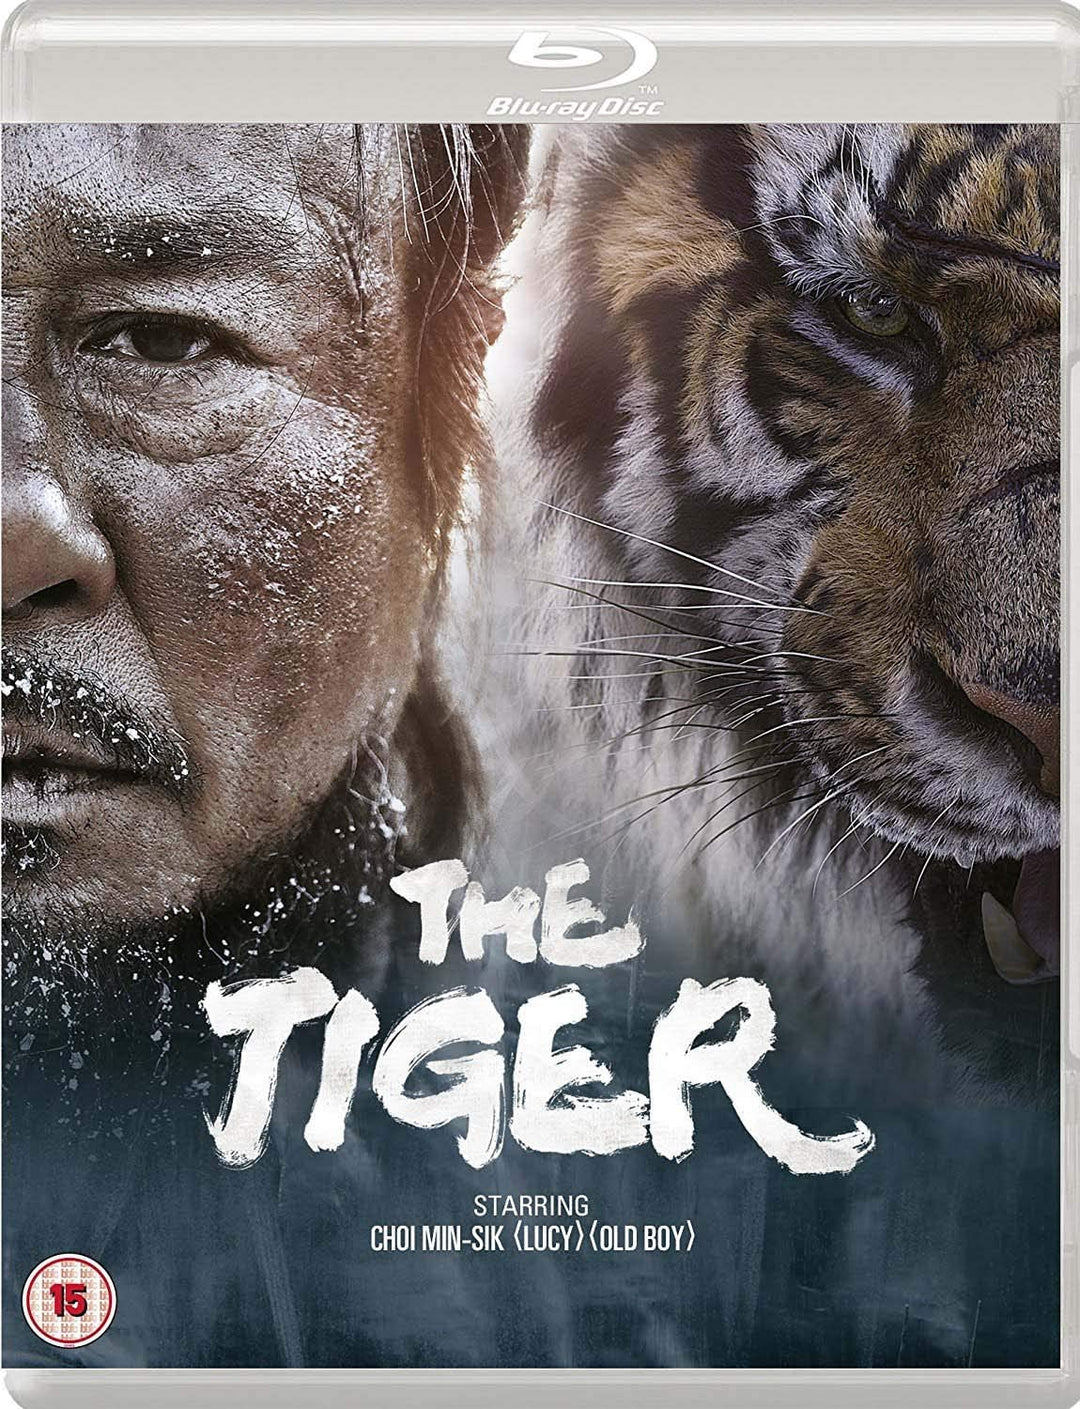 The Tiger: An Old Hunter's Tale (2015) - [Blu-ray]